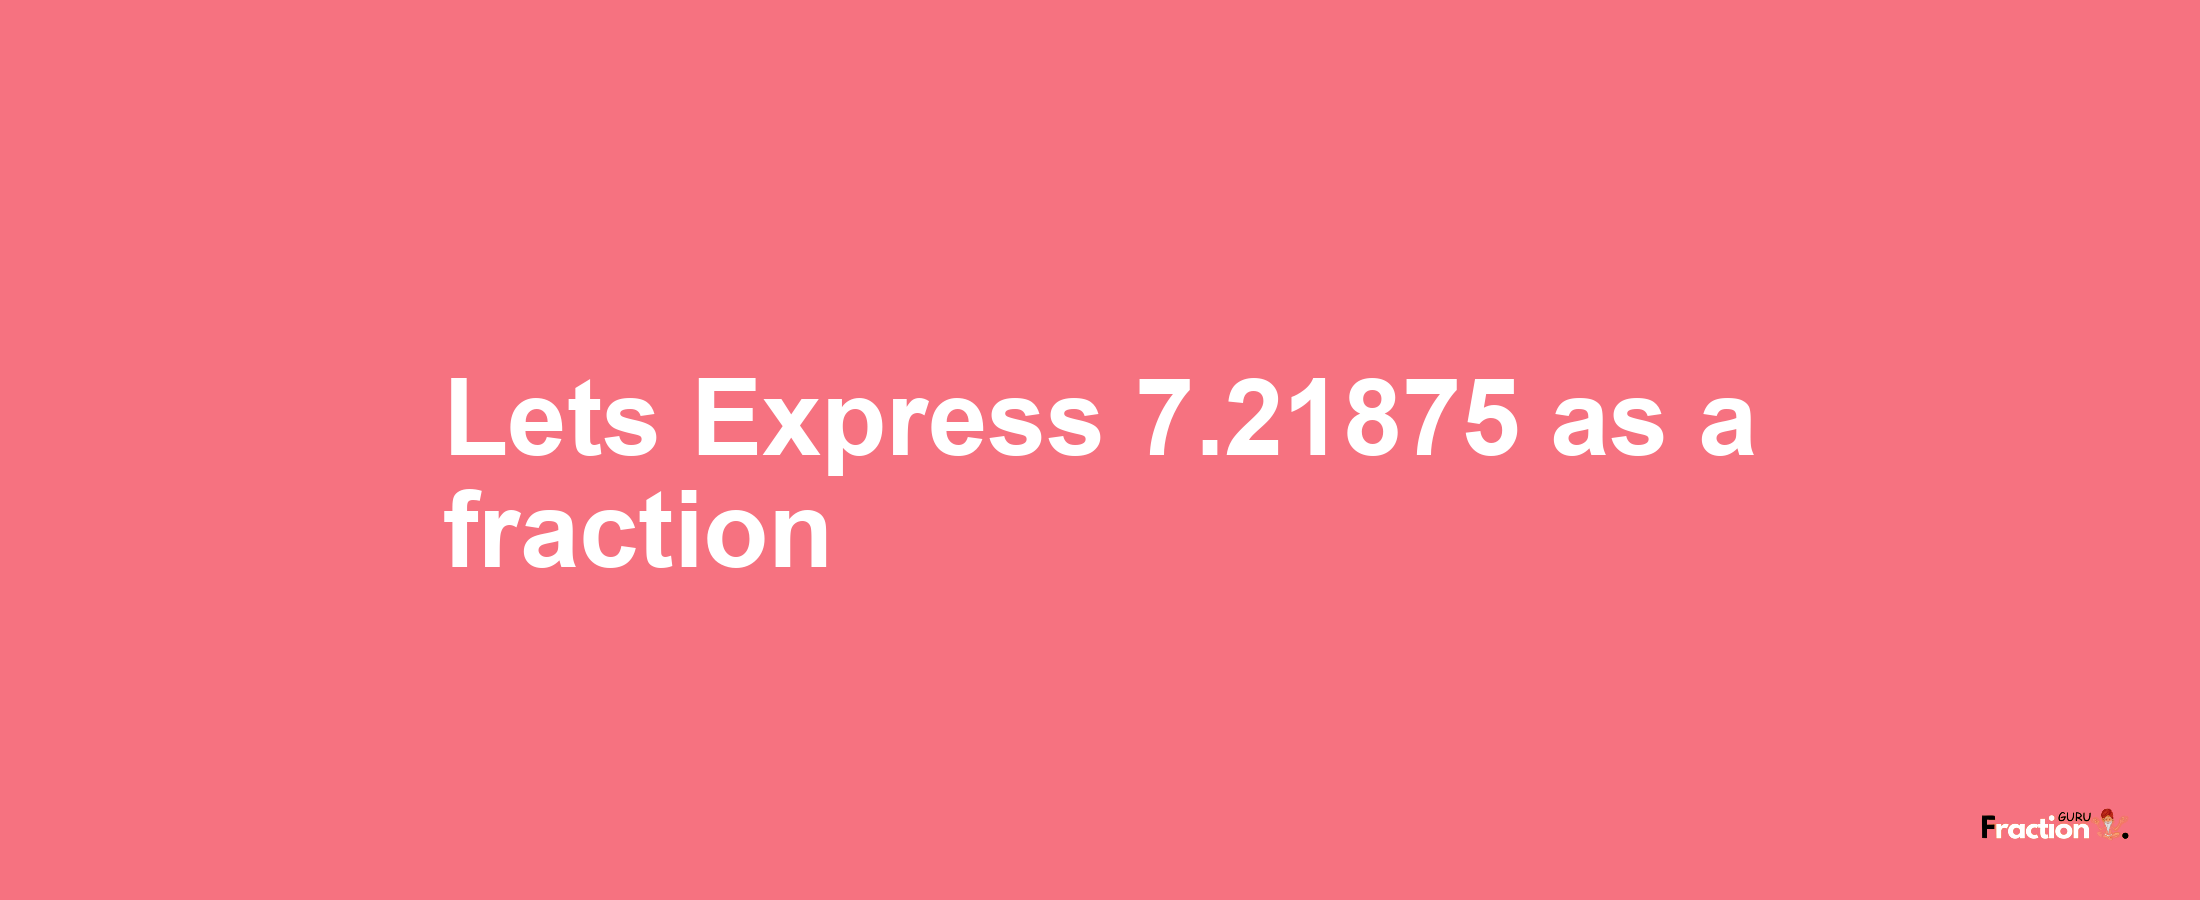 Lets Express 7.21875 as afraction